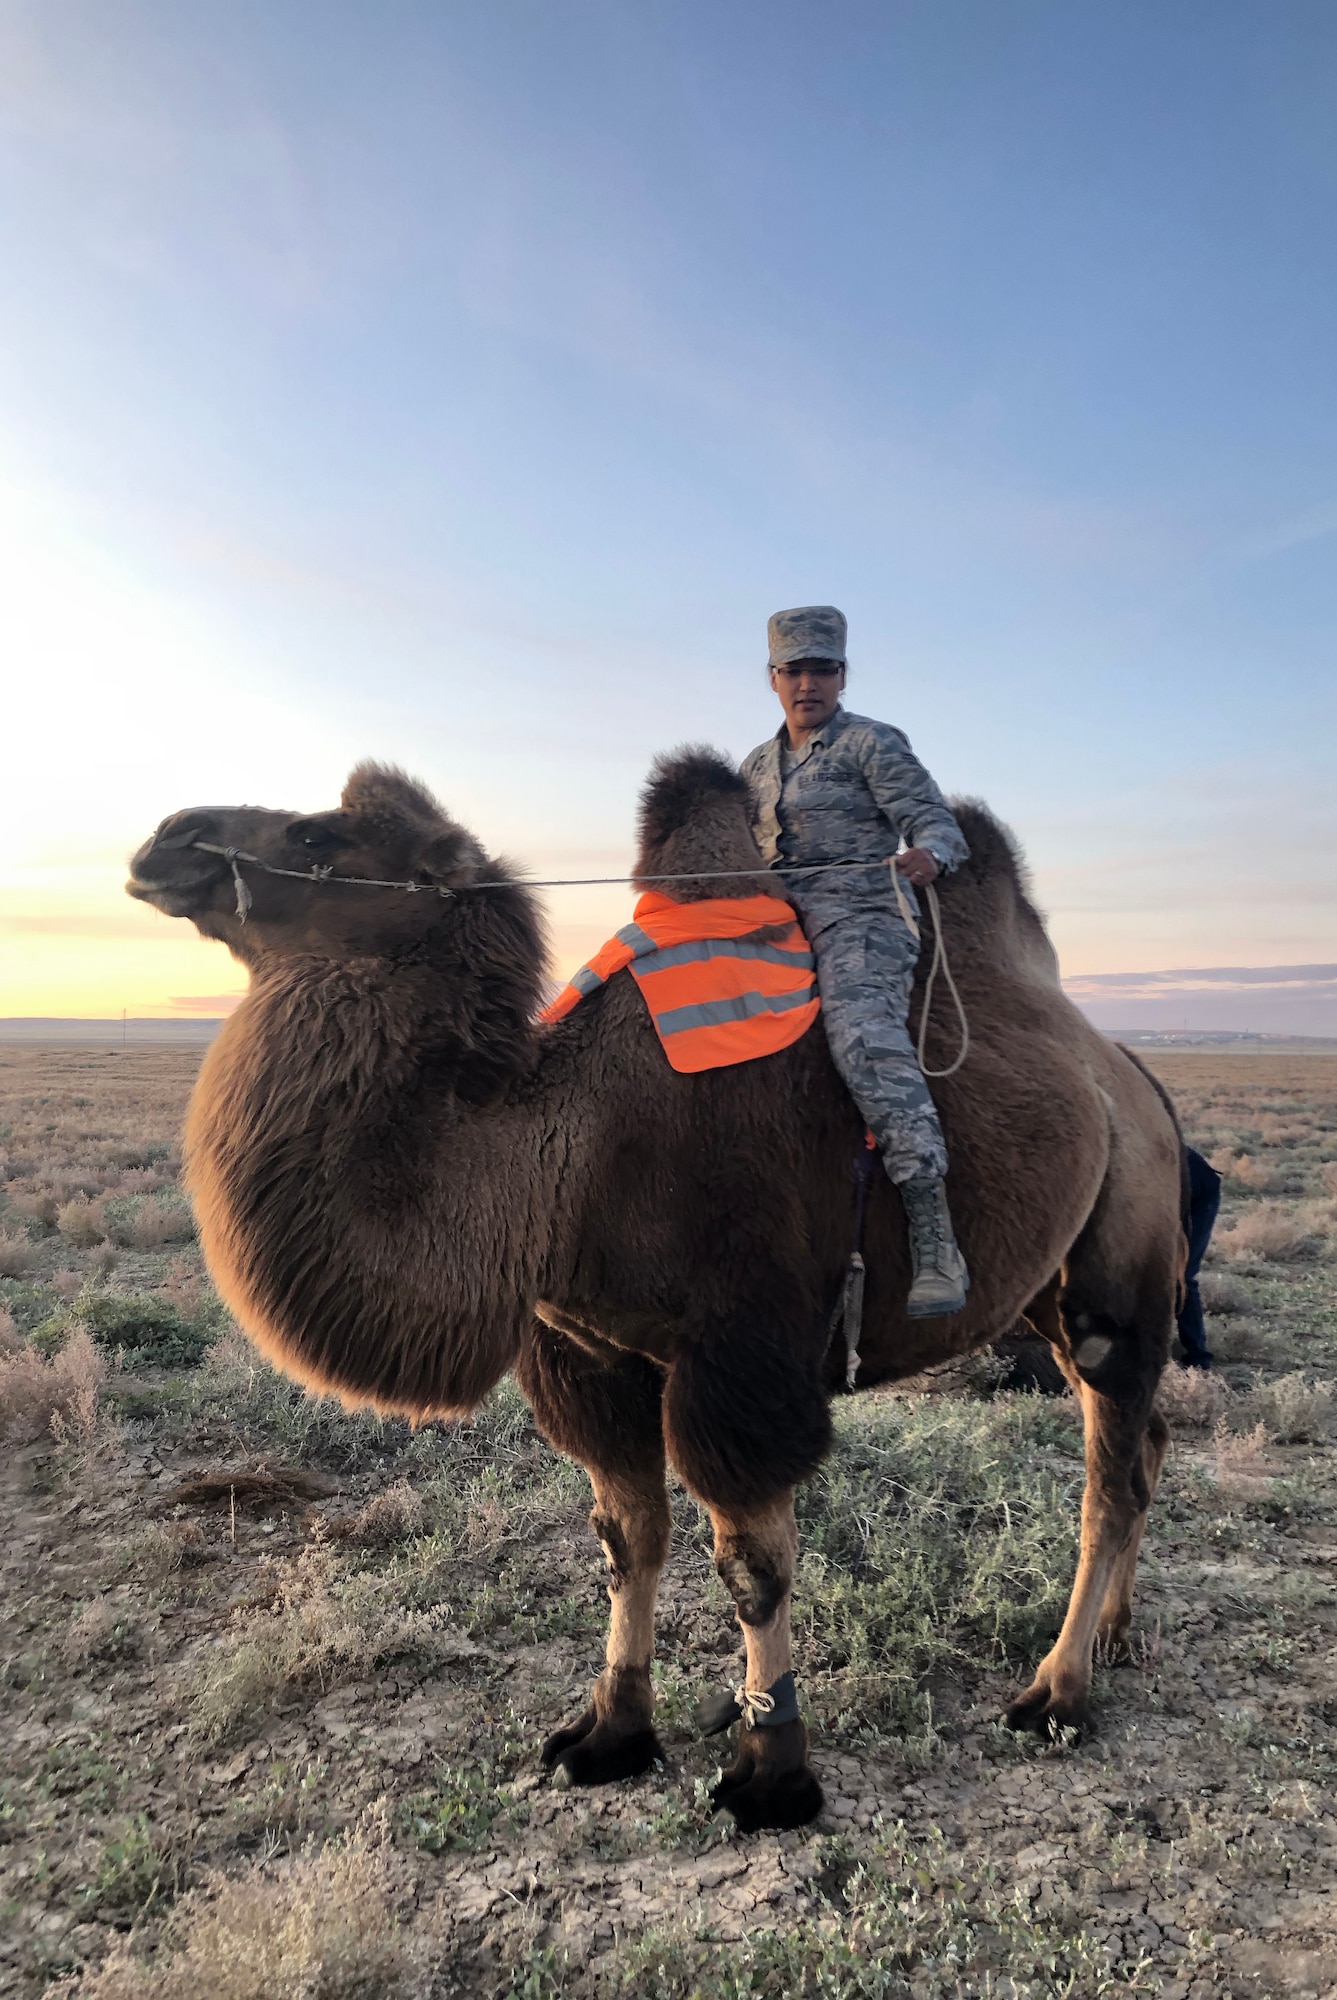 U.S. Air Force Senior Airman Liana Chythlook, assigned to the 176th Medical Group, Alaska Air National Guard, rides a Bactrian camel Sept. 20, 2019,  at a farm during Gobi Wolf 2019 in Sainshand, Mongolia. GW 19 was hosted by the Mongolian National Emergency Management Agency and Mongolian Armed Forces as part of the United States Army Pacific's humanitarian assistance and disaster relief "Pacific Resilience" series. (Courtesy photo/Released)